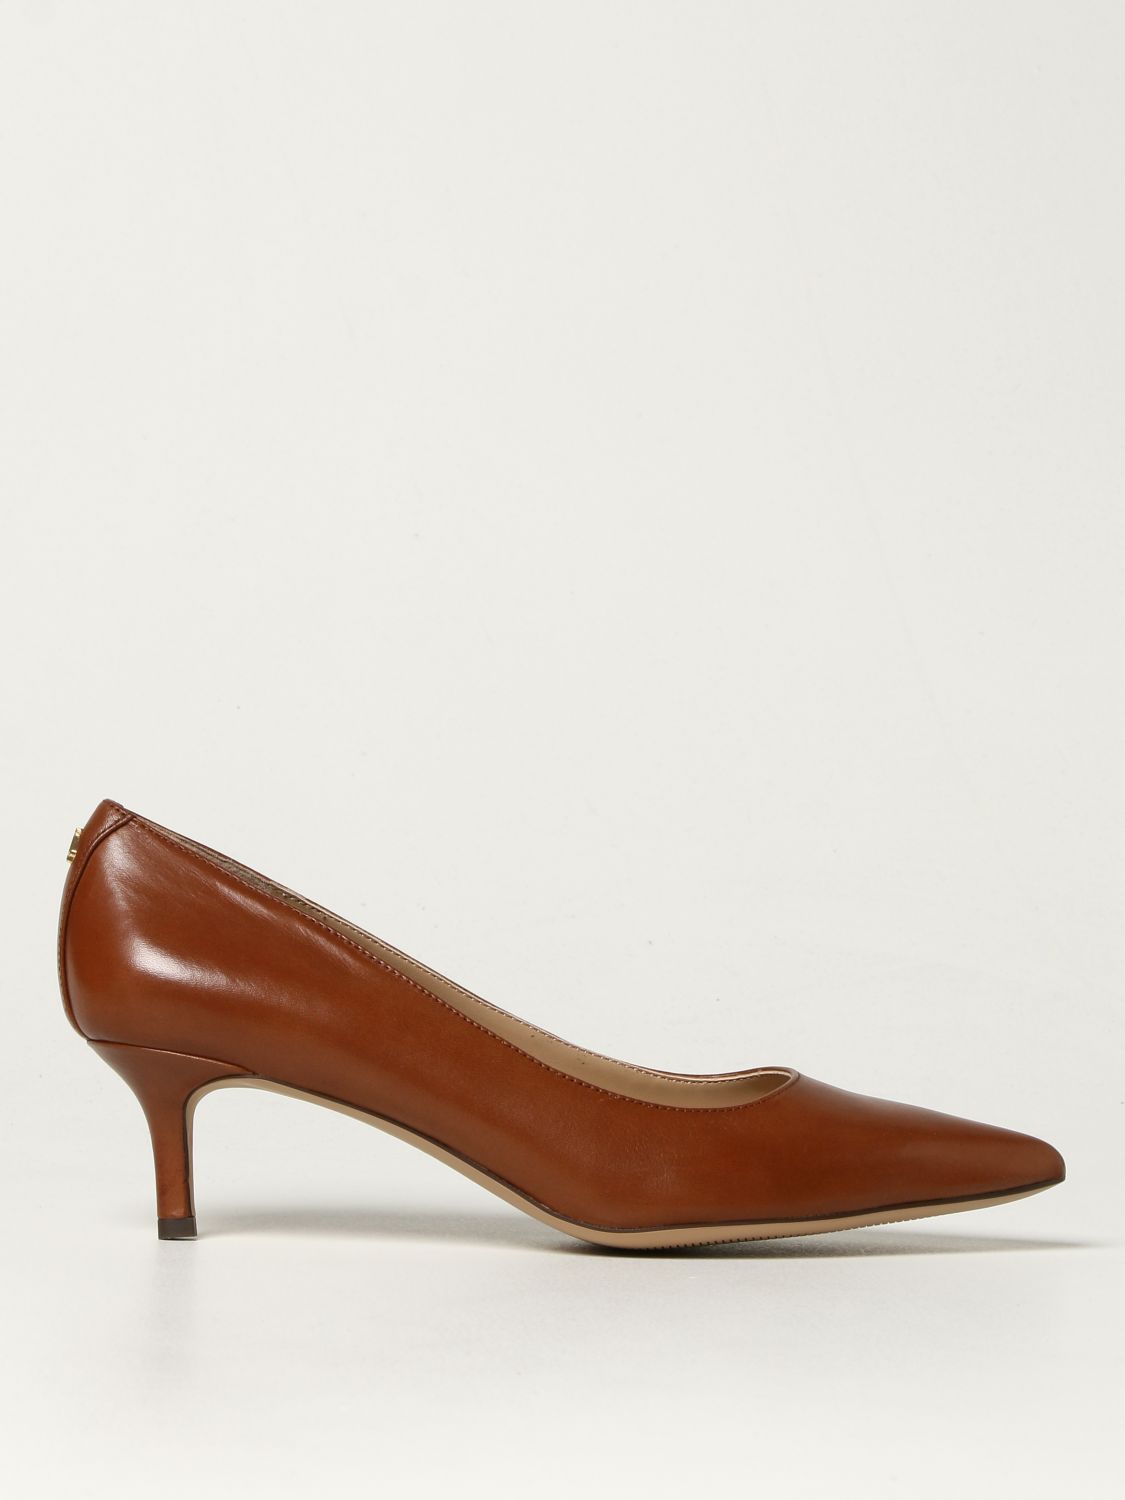 Pumps Lauren Ralph Lauren: Pumps Lauren Ralph Lauren in leather leather 1